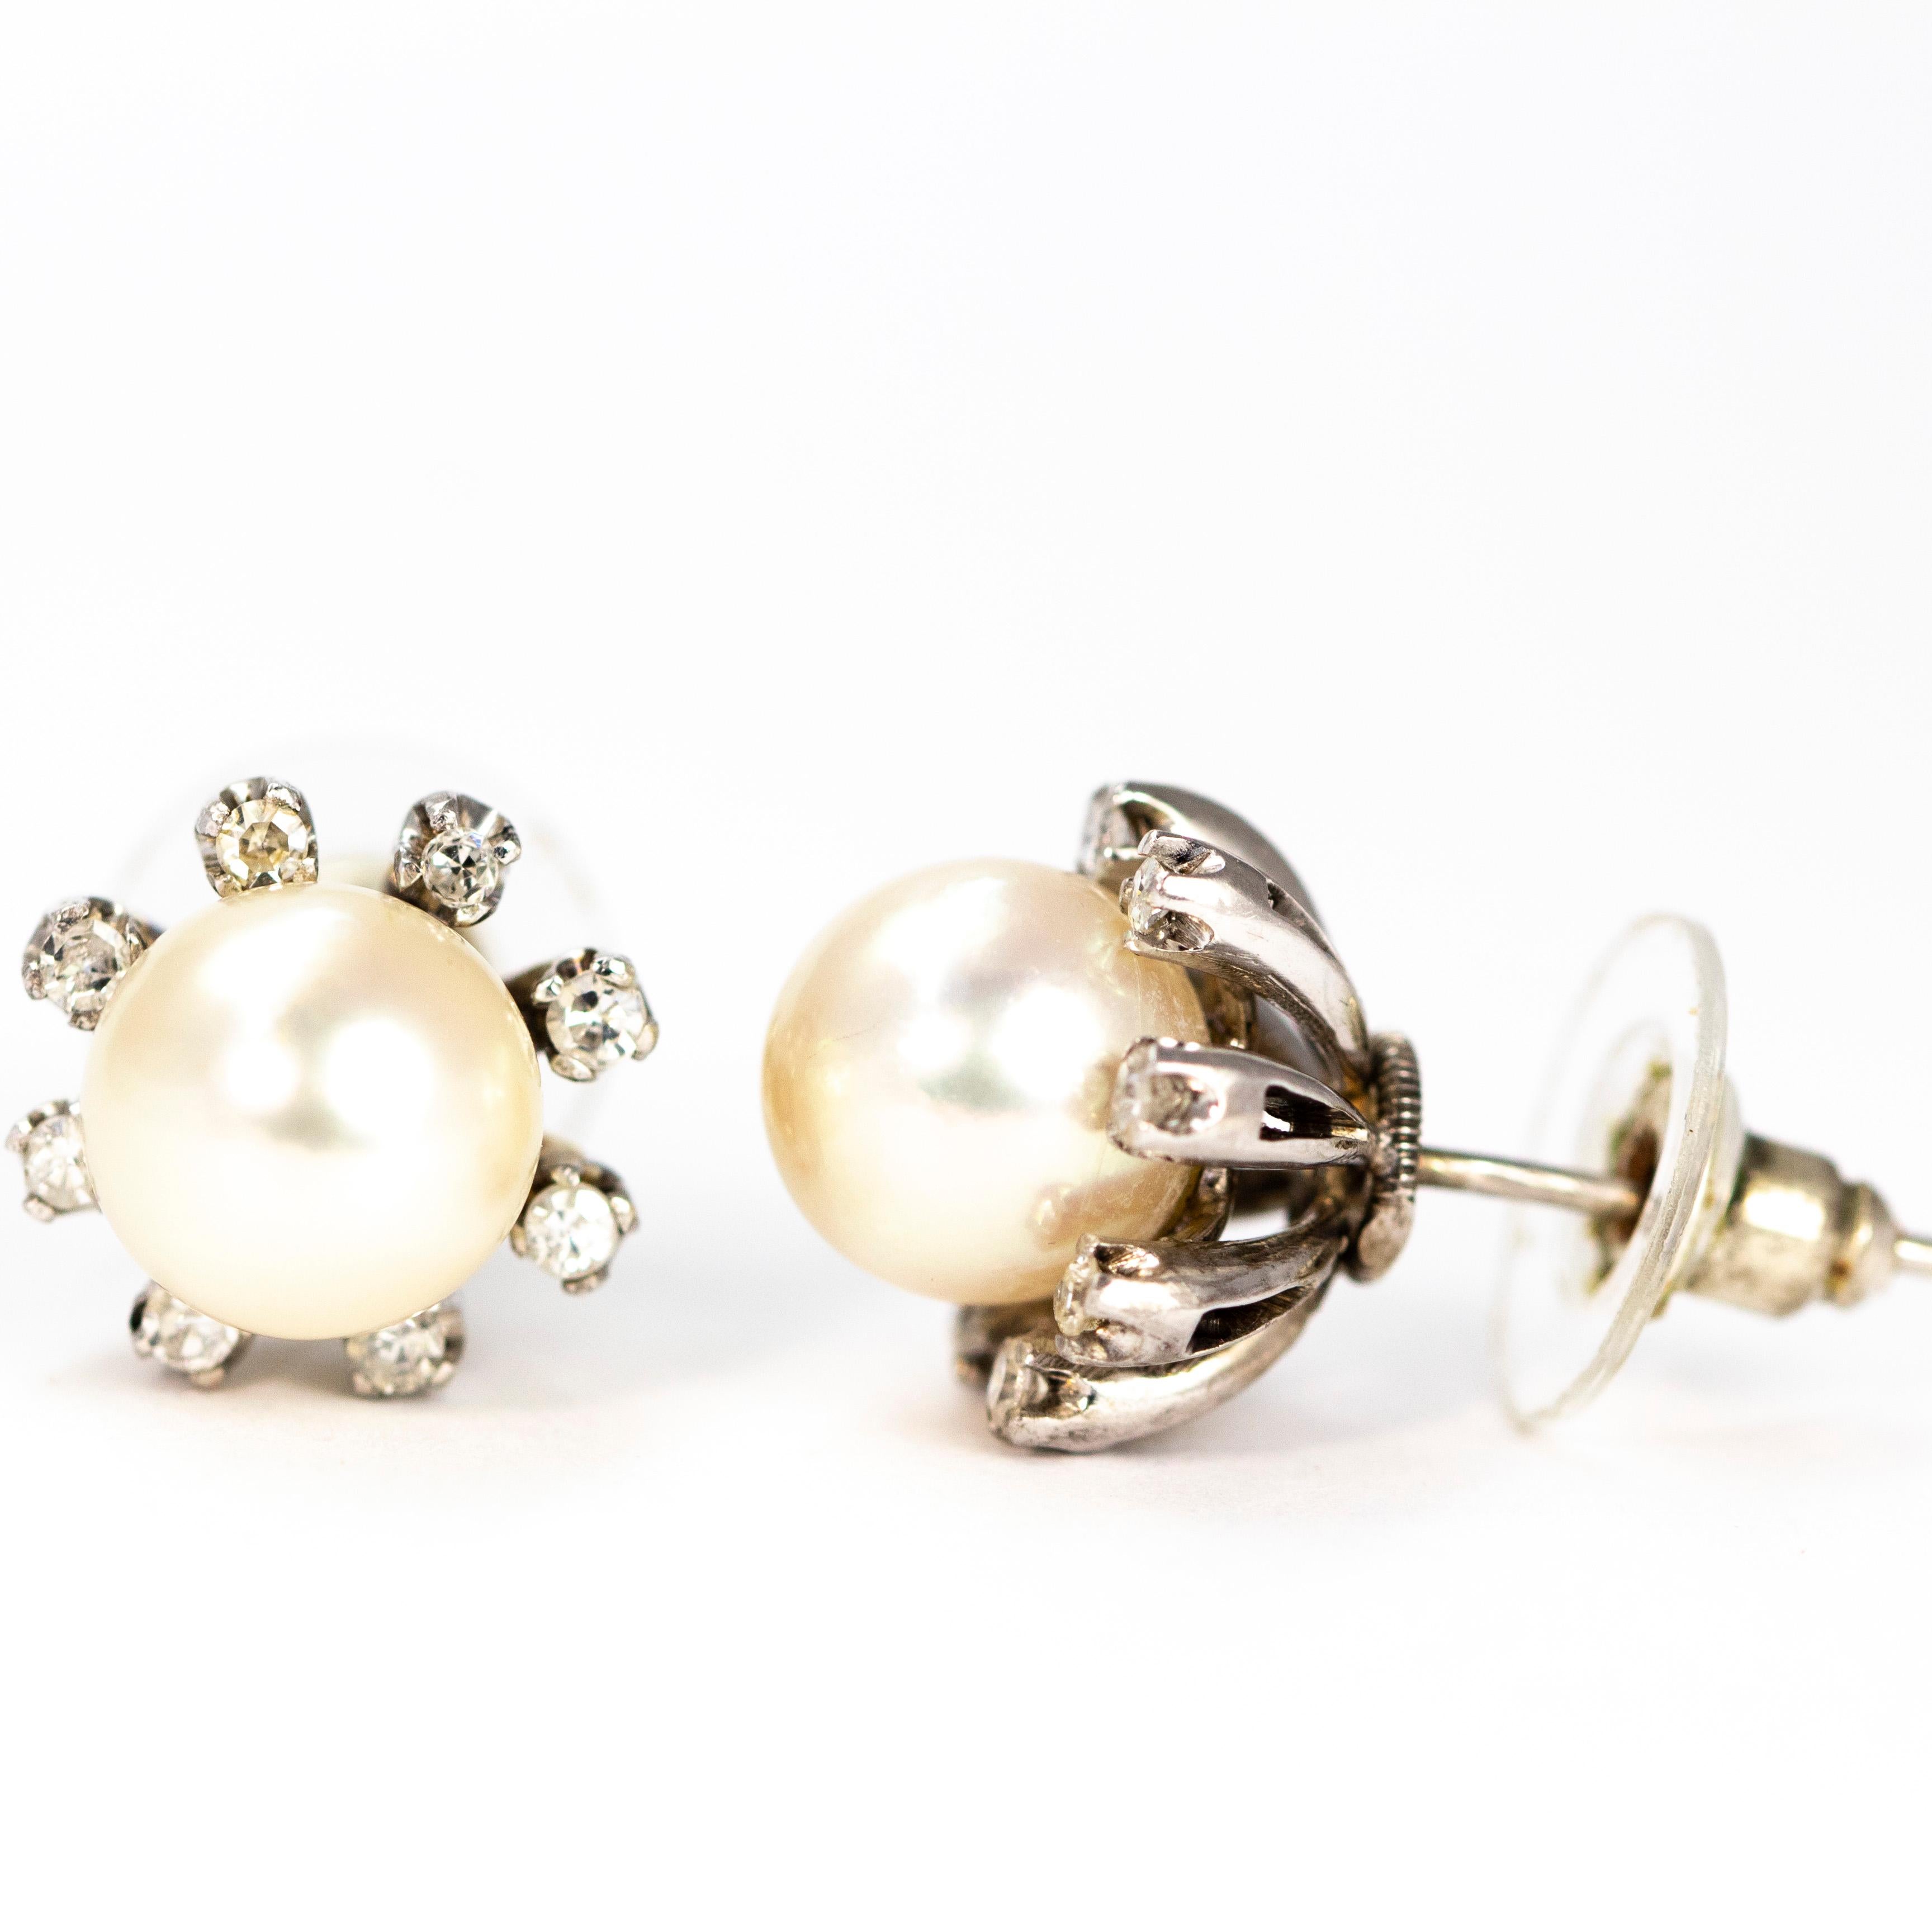 These stunning shimmering giant pearls are perched upon and surrounded by single diamonds each singularly set. The earrings are modelled in 14ct white gold which complements the pearl and diamonds perfectly.

Diameter: 13mm

